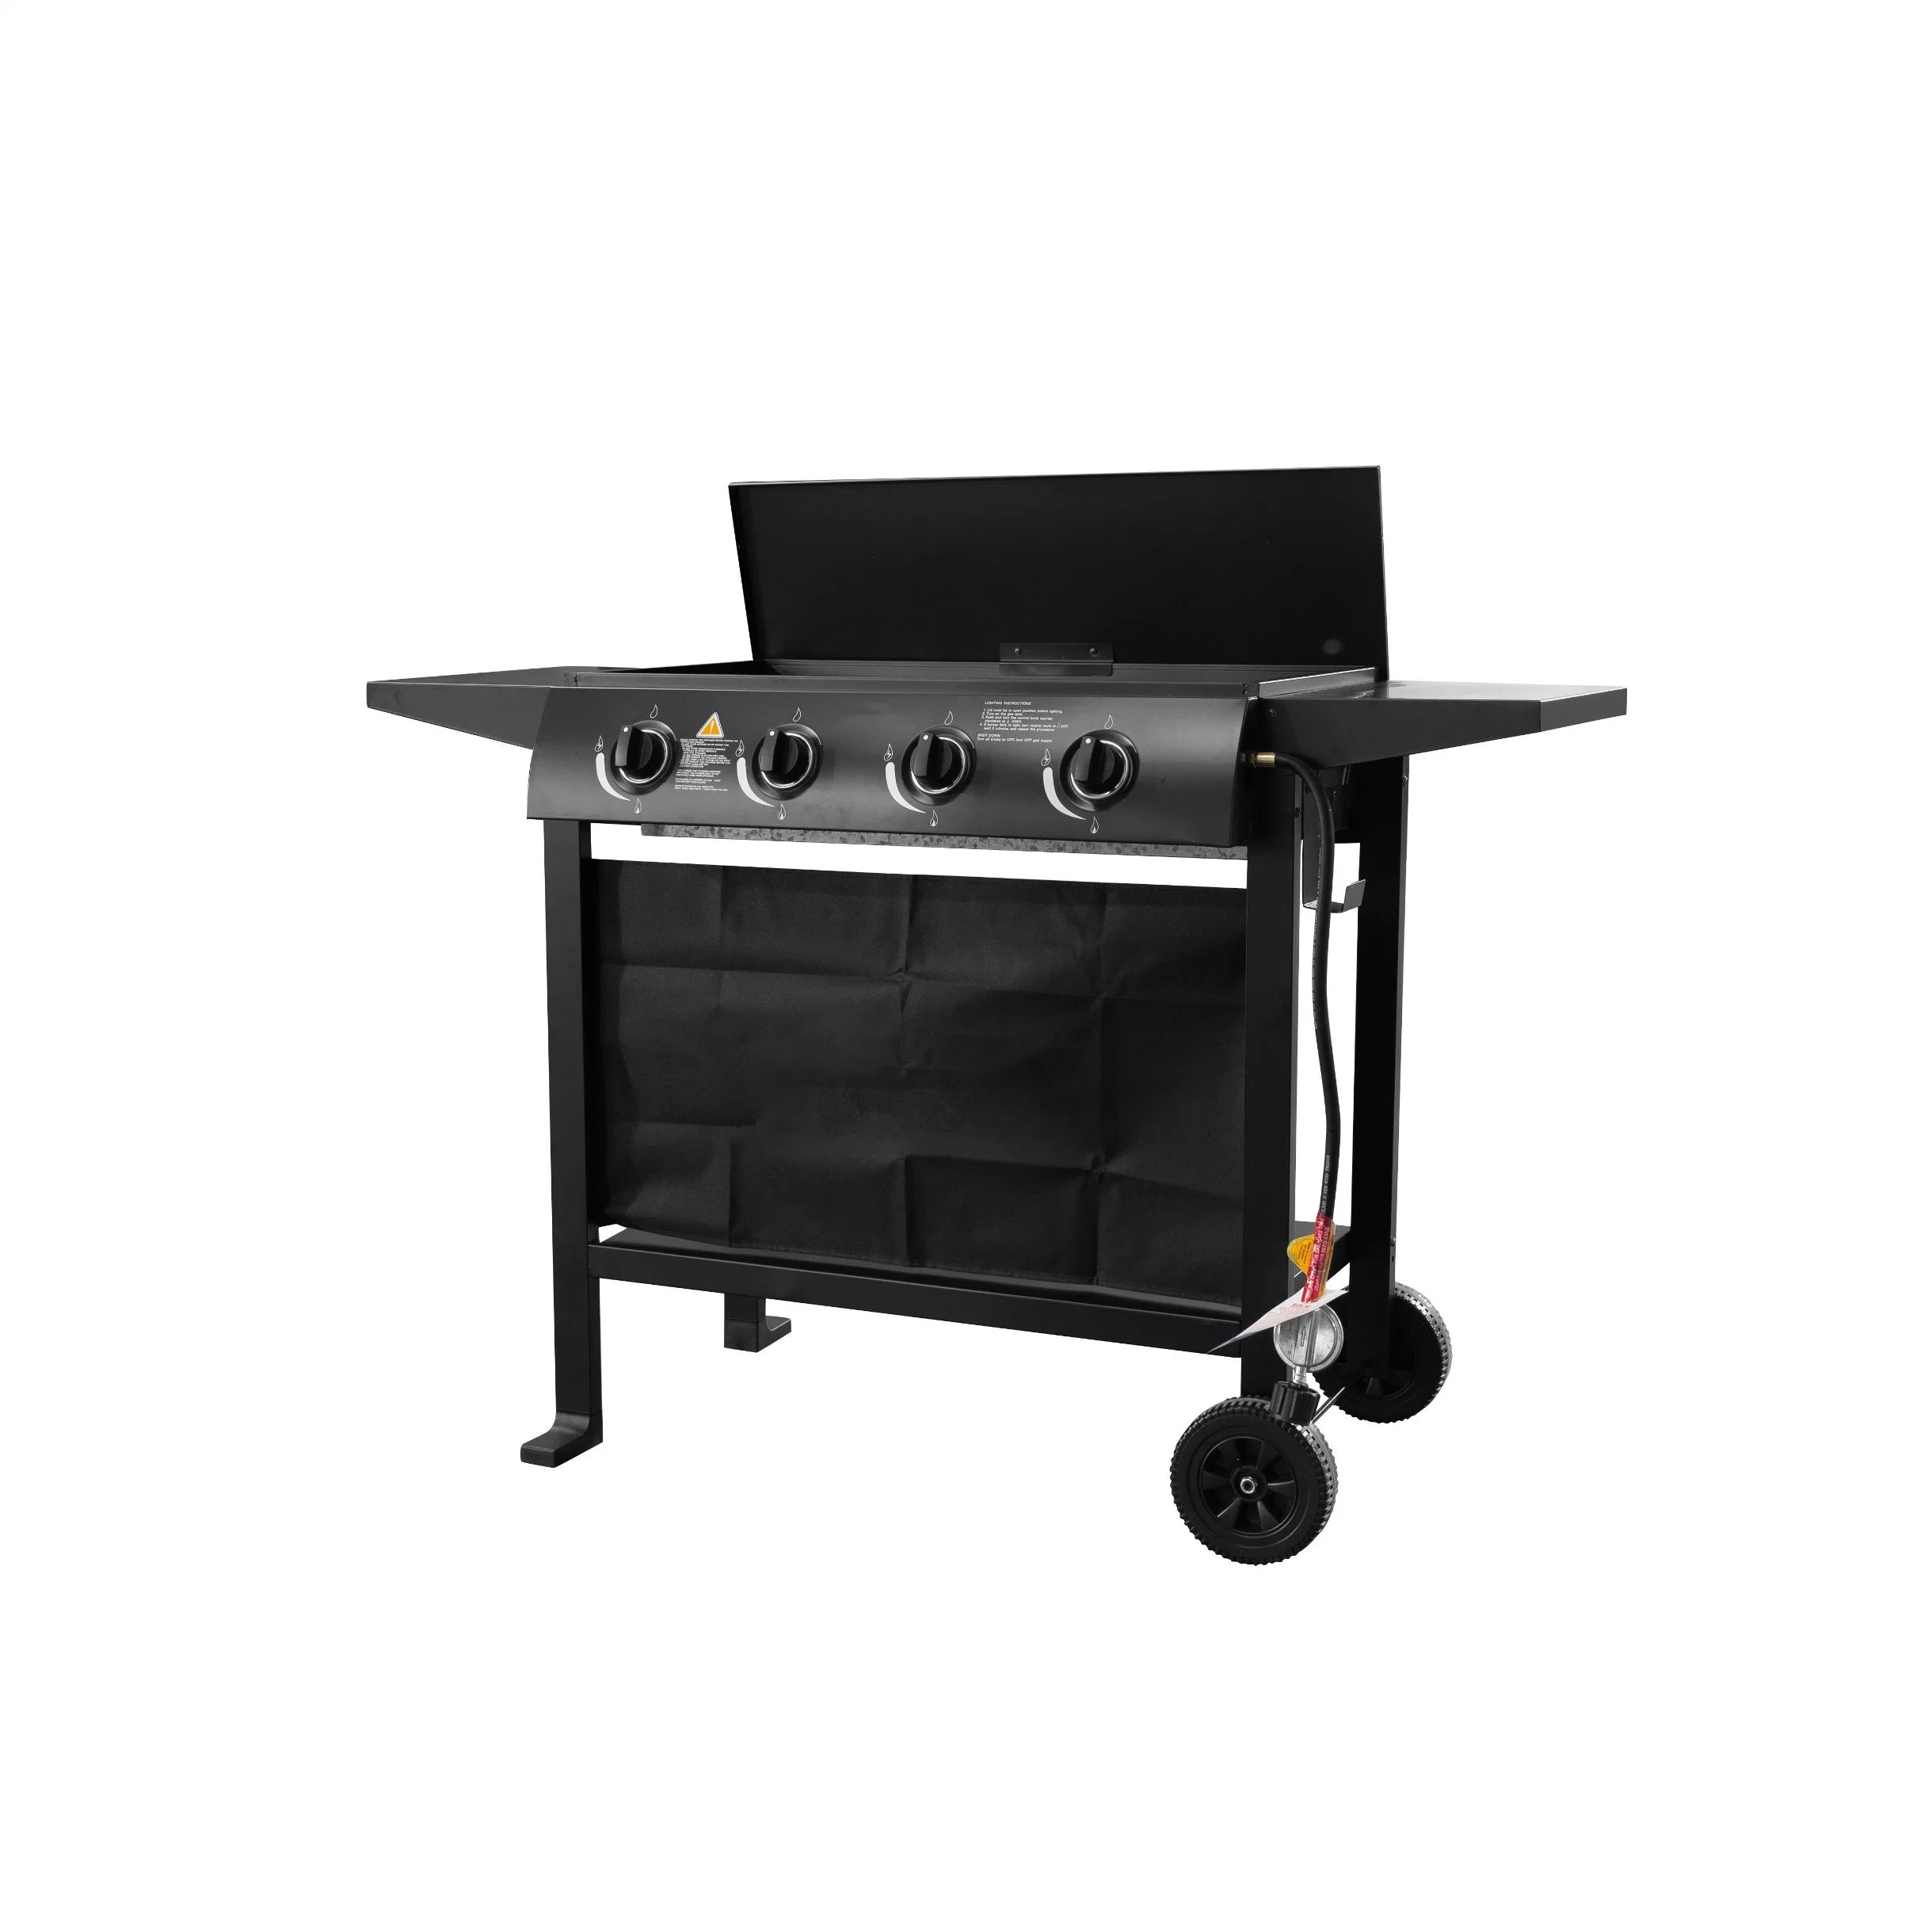 4 Burner Gas Barbecue Grill with Infrared Technology and Side-Burner